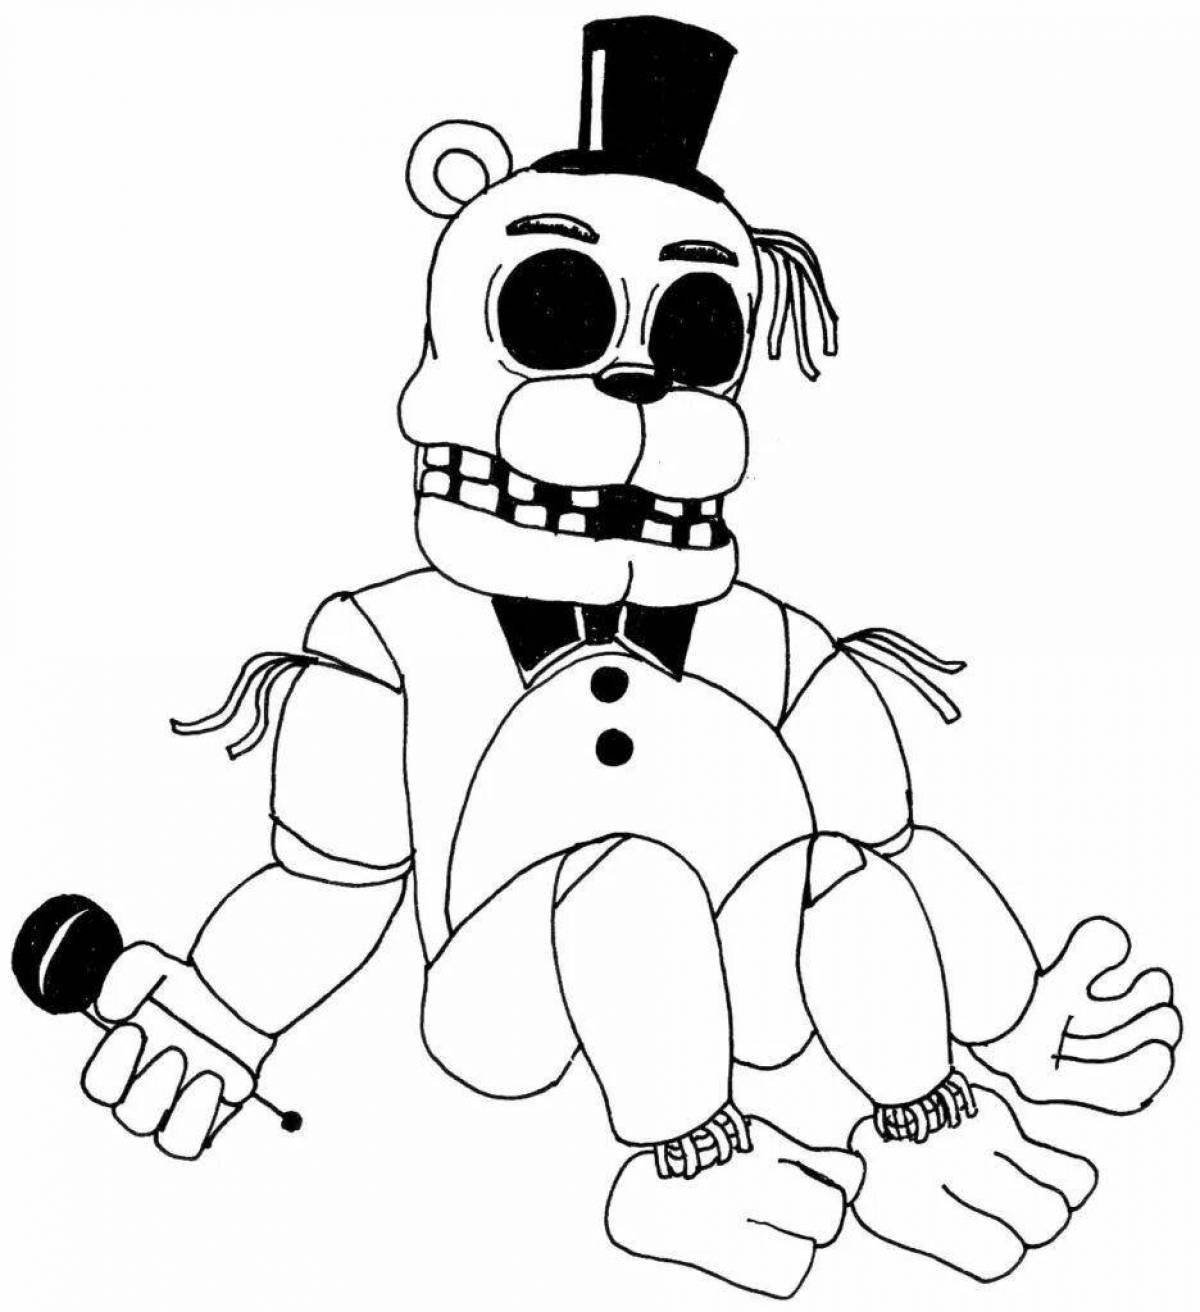 Golden Freddy's mesmerizing coloring book